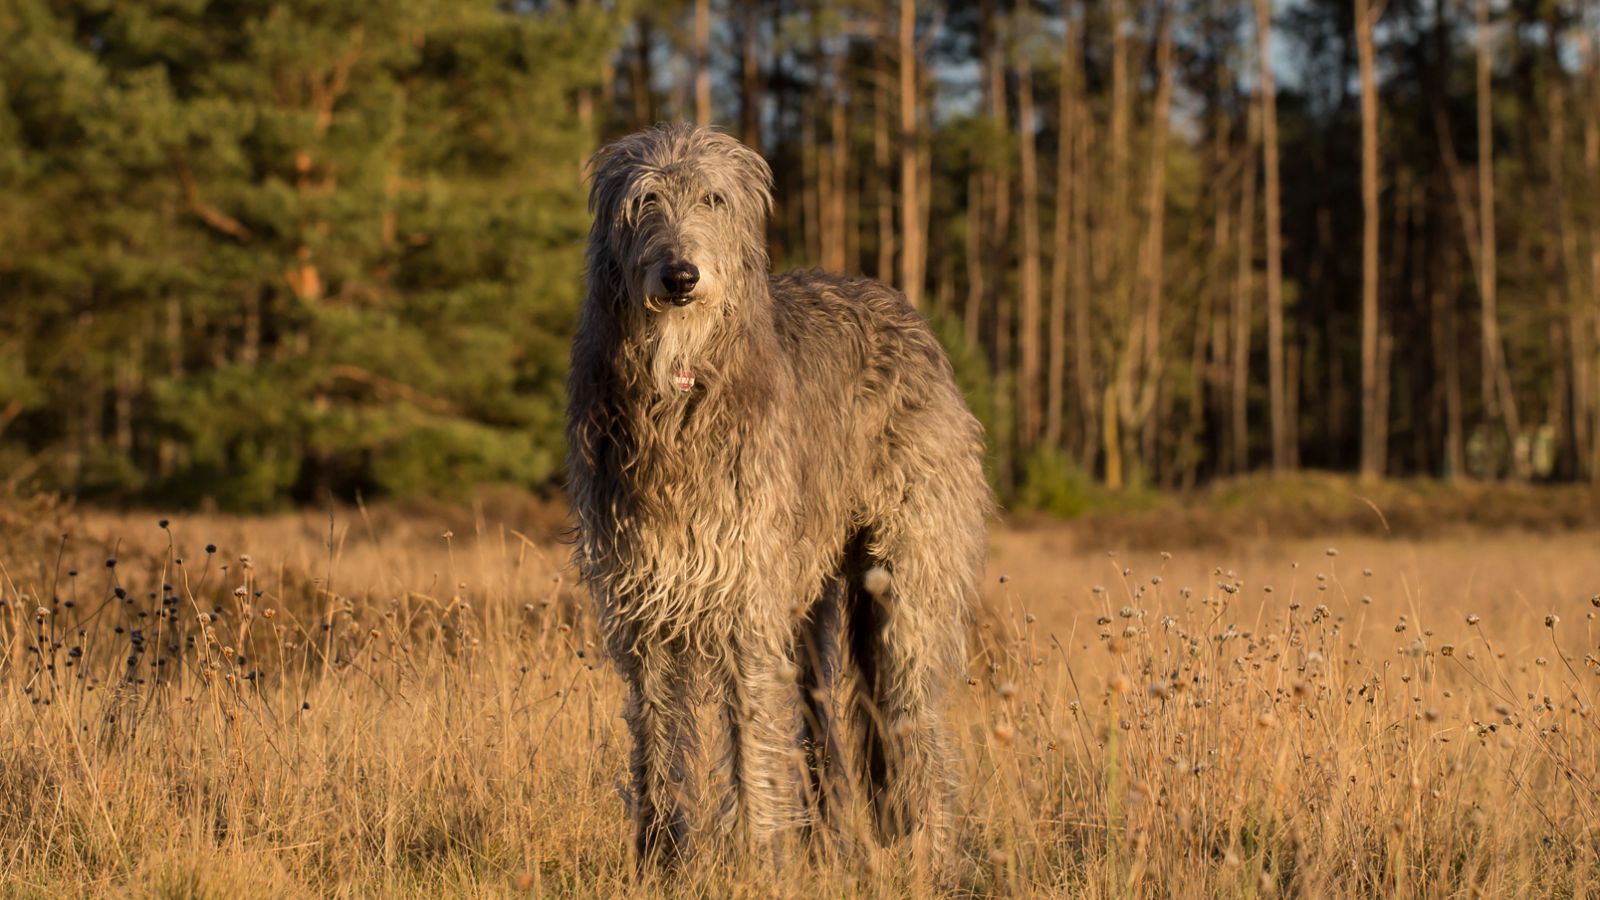 <p>Similar in appearance and size to the Irish Wolfhound, Scottish Deerhounds have a similarly short lifespan of only 8 to 11 years. <a href="https://www.hillspet.com/dog-care/dog-breeds/scottish-deerhound">Hill’s</a> describes them as laid-back and undemanding pets but states that they’re prone to heart disease and cancer, much like other large breeds on this list.</p>